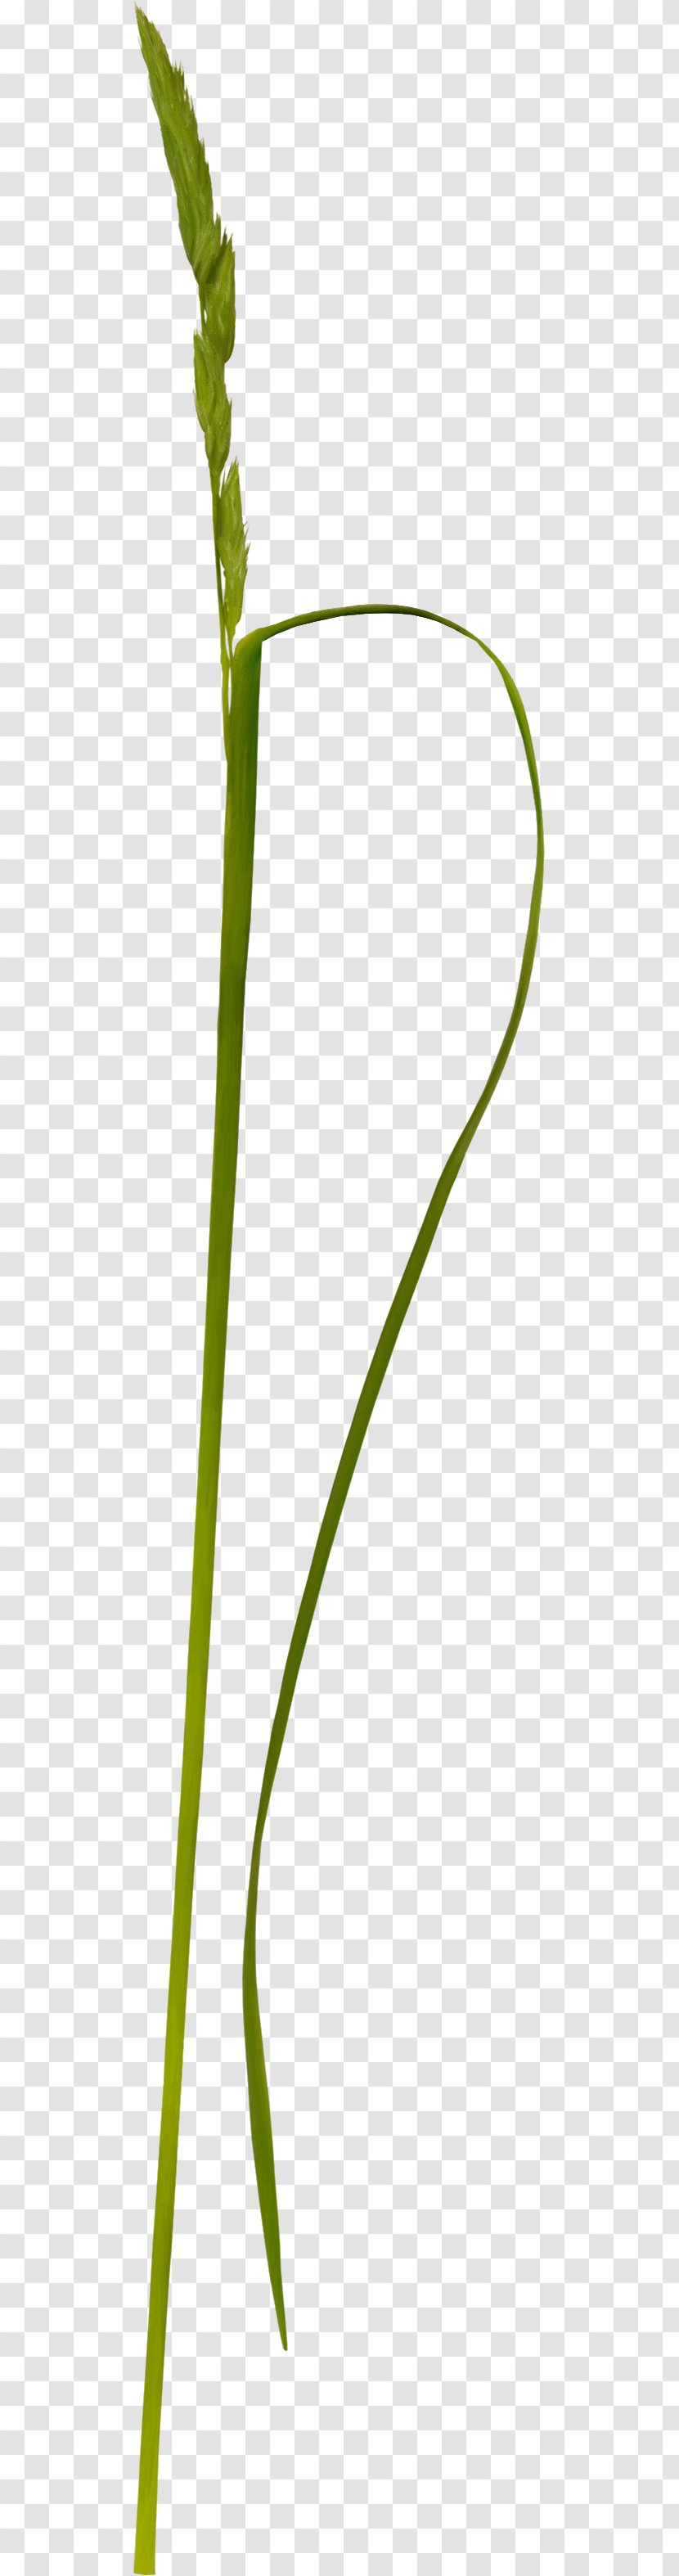 Grasses Weed Clip Art - Photography - Green Grass Transparent PNG